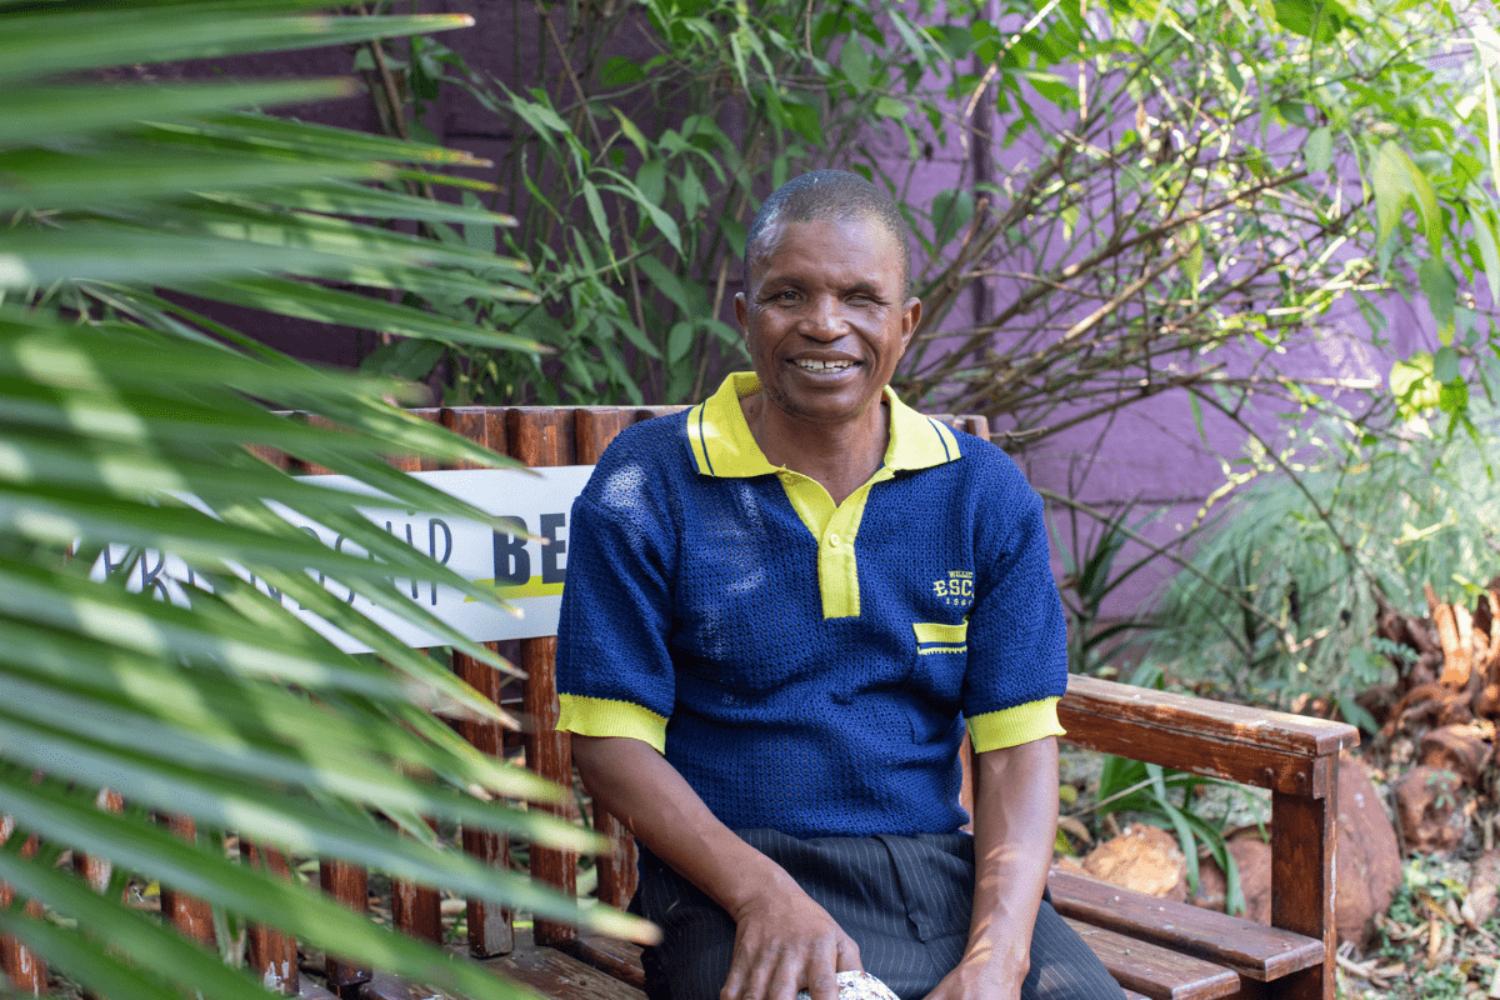 Elton Mudzingwa, a street vendor who struggled to cope after his wife died, in Zimbabwe